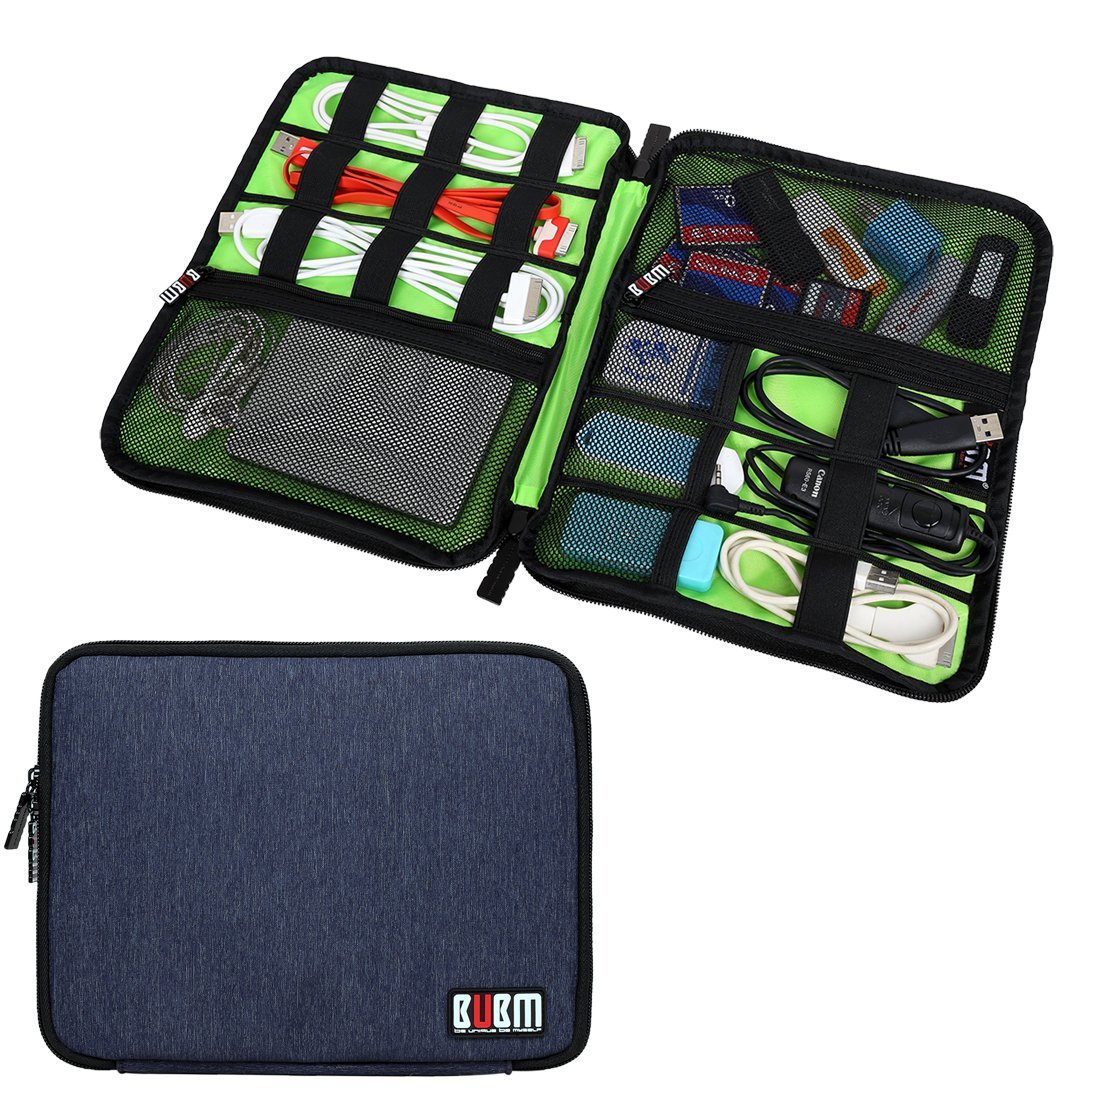 BUBM oversized Capacity Watch Tablet Earphone U Disk Cable Digital Devices Cable Organizer Case Storage Bag